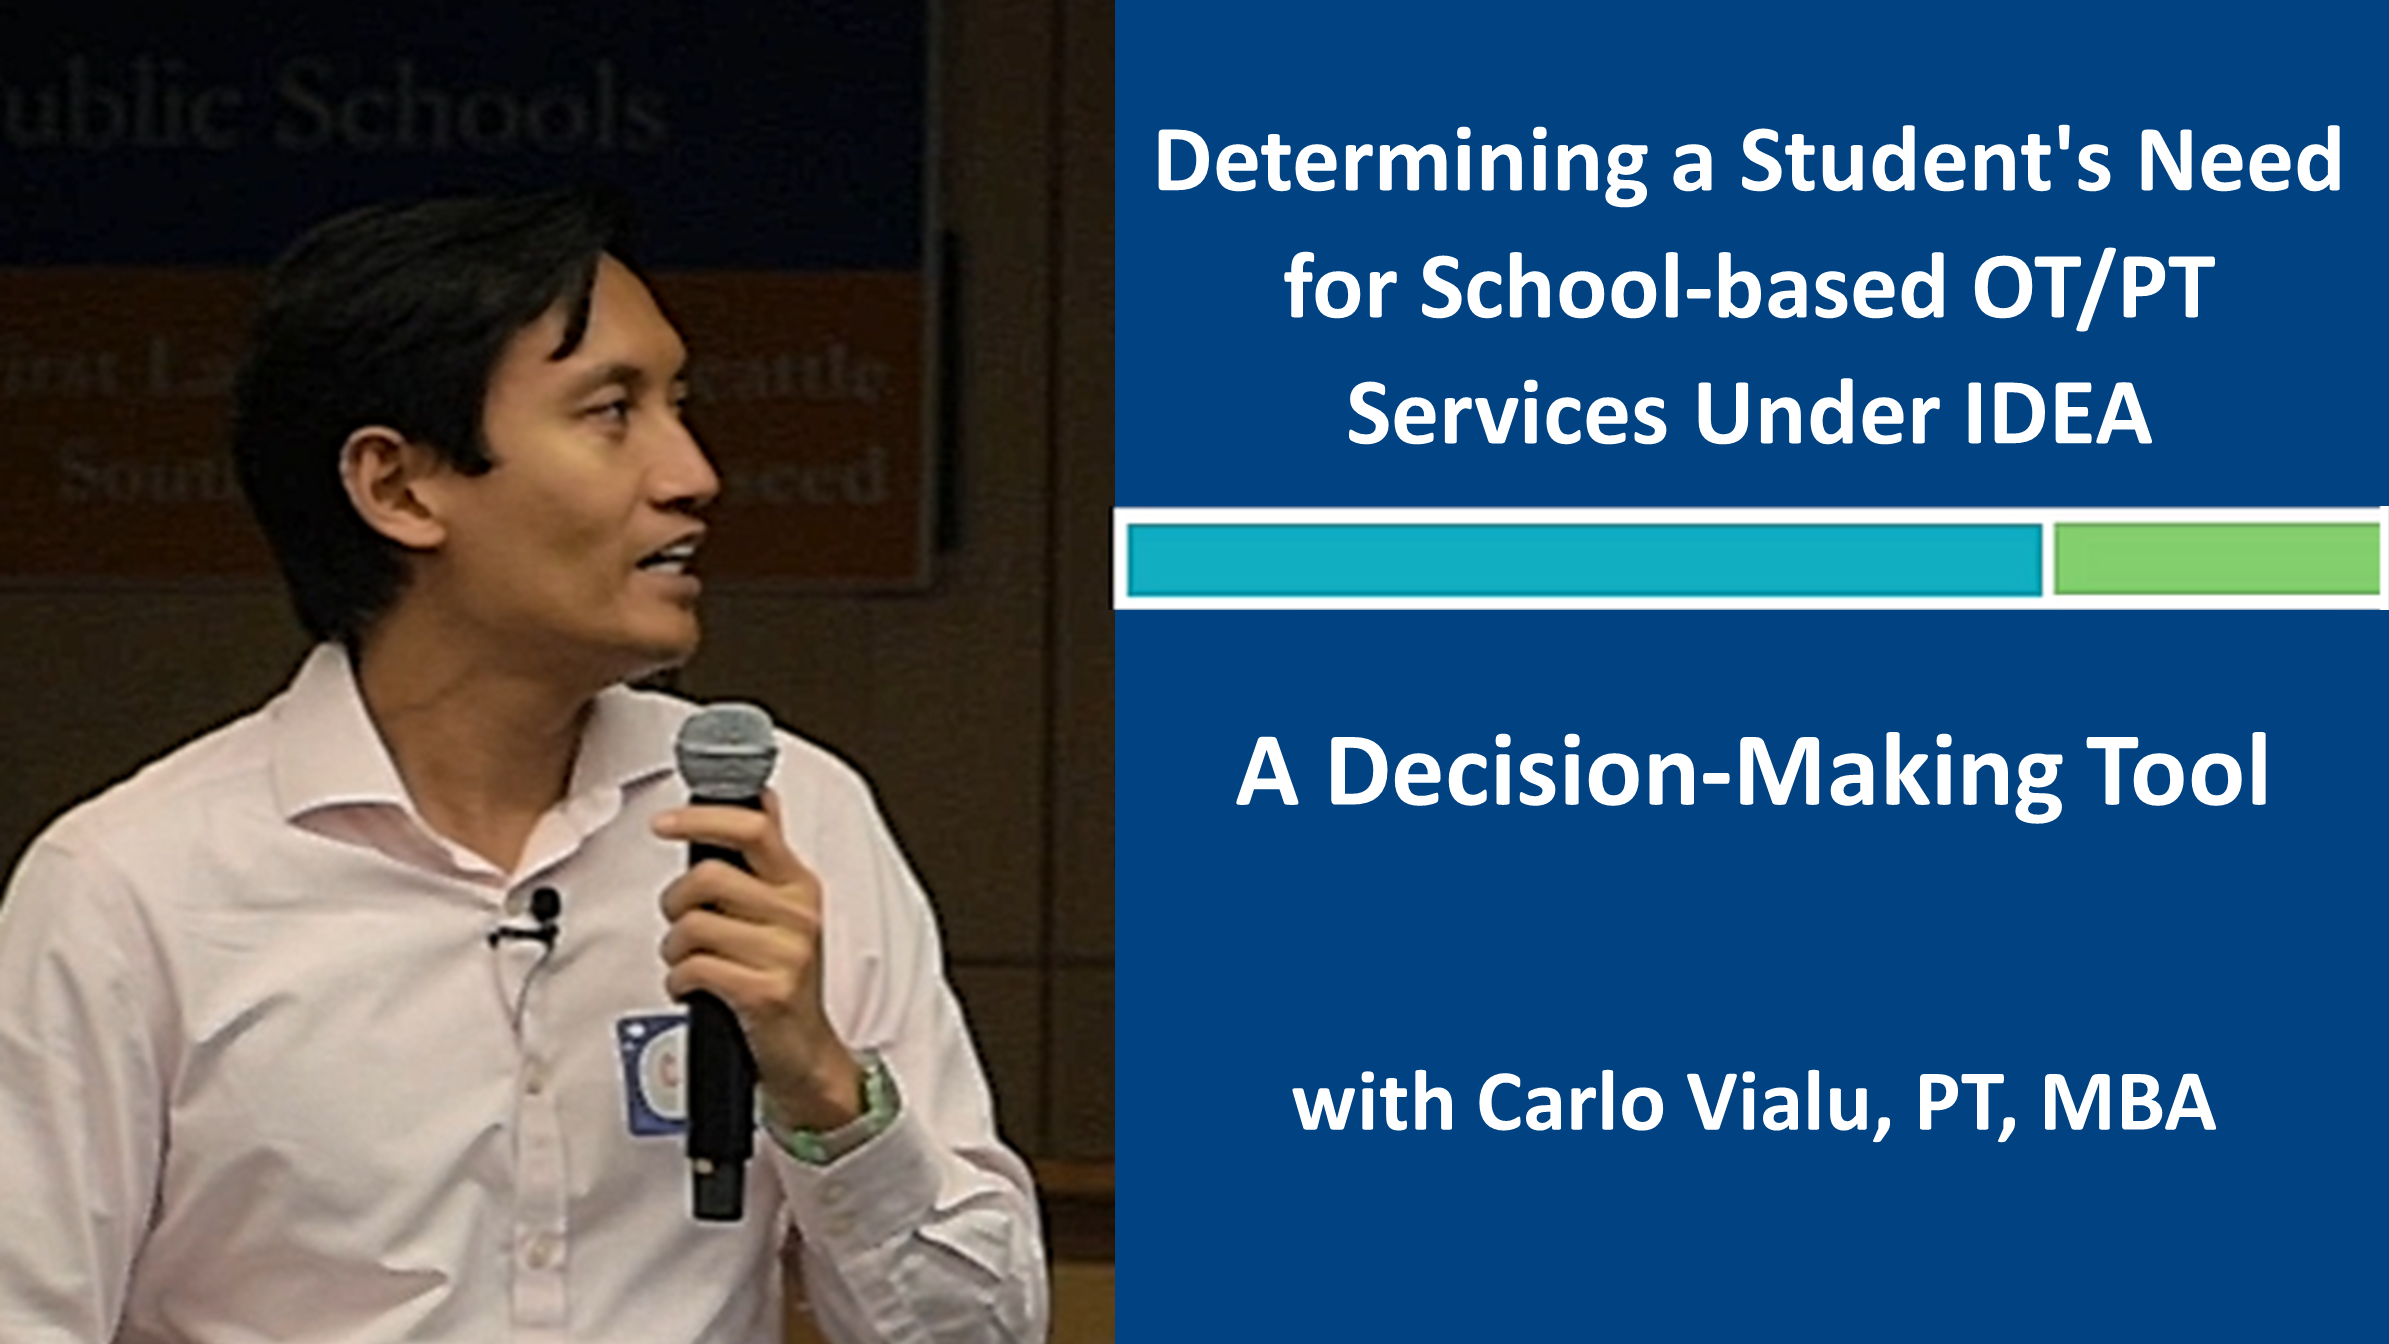 Webinar 7: Determining Needs for School-based OT/PT Services with Carlo Vialu, PT, MBA